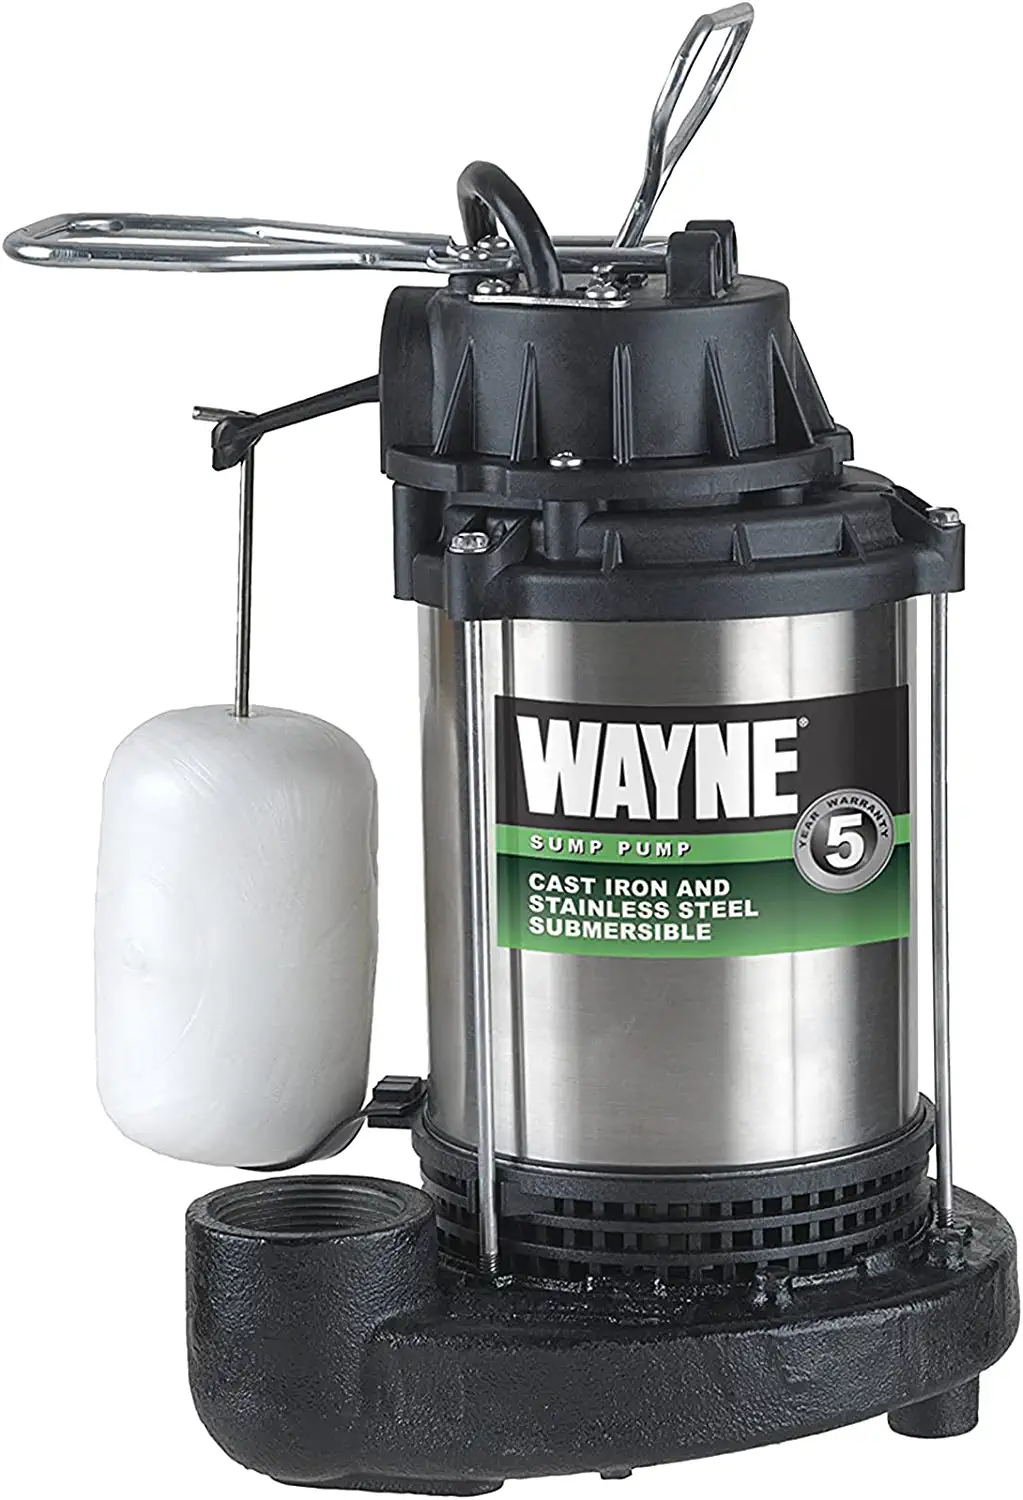 Wayne Submersible Cast-Iron and Stainless-Steel Sump Pump Logo